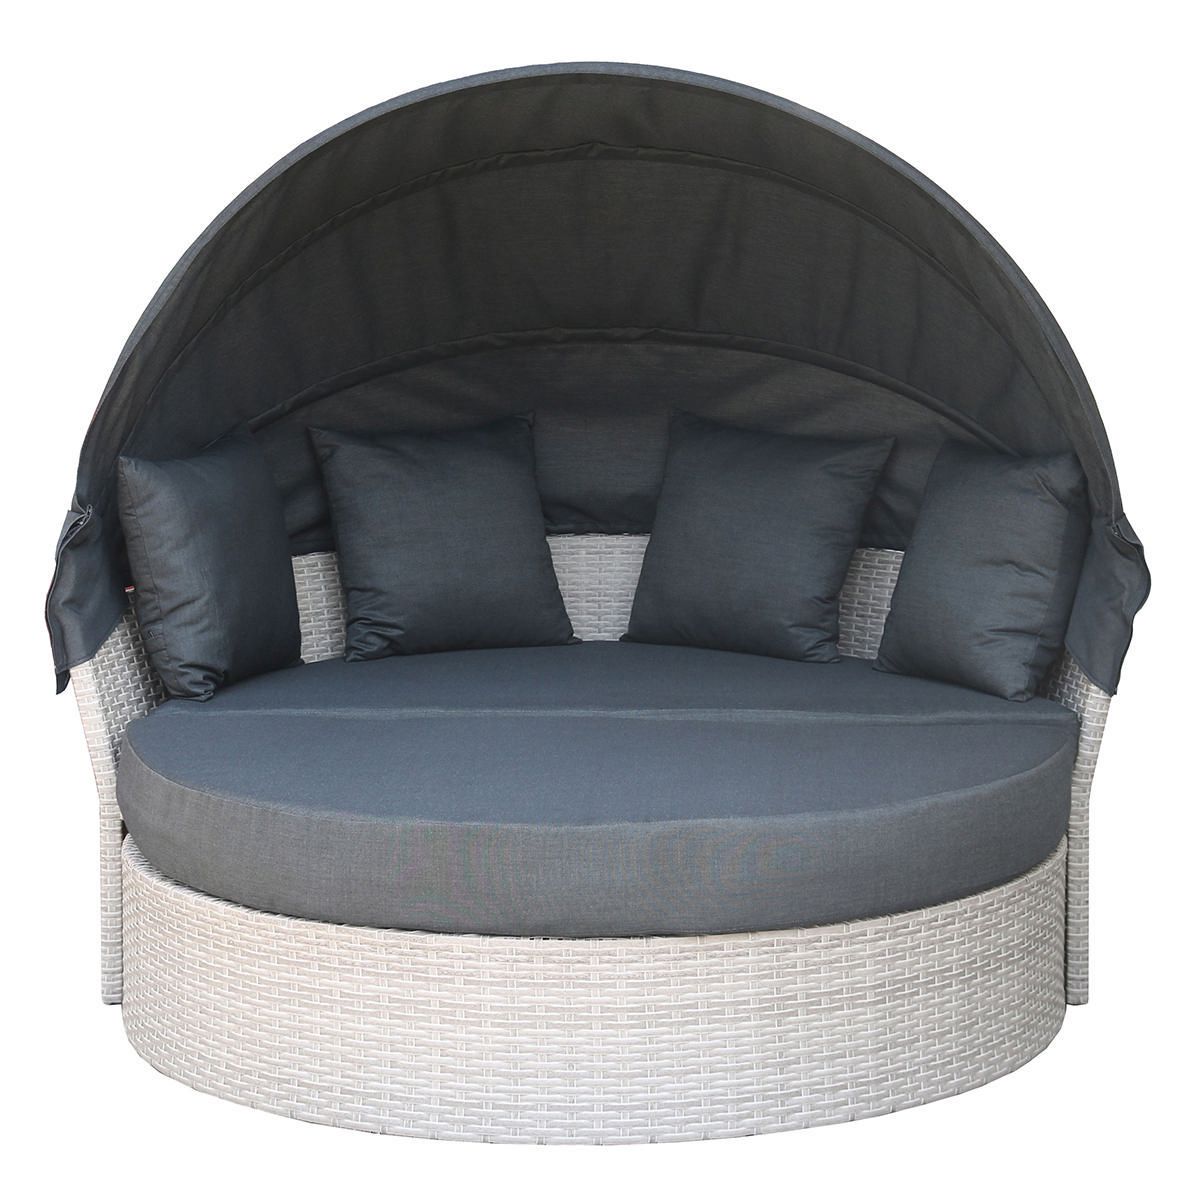 Day Bed With Cover Canada, Outdoor Daybeds With Canopy Canada